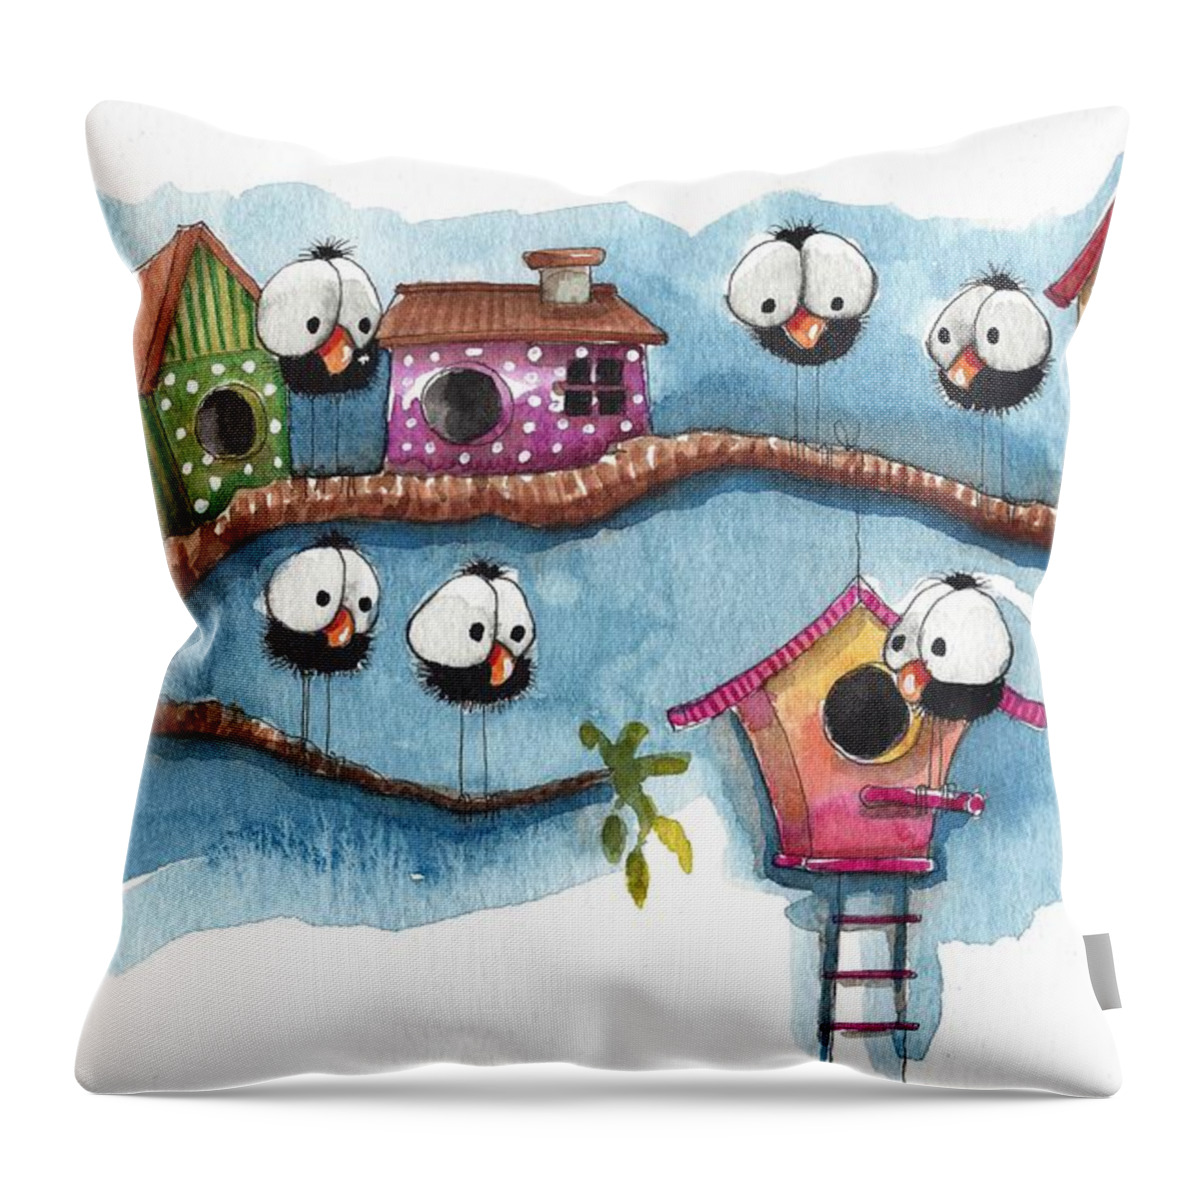 Whimsical Bird Throw Pillow featuring the painting The New Neighbor by Lucia Stewart